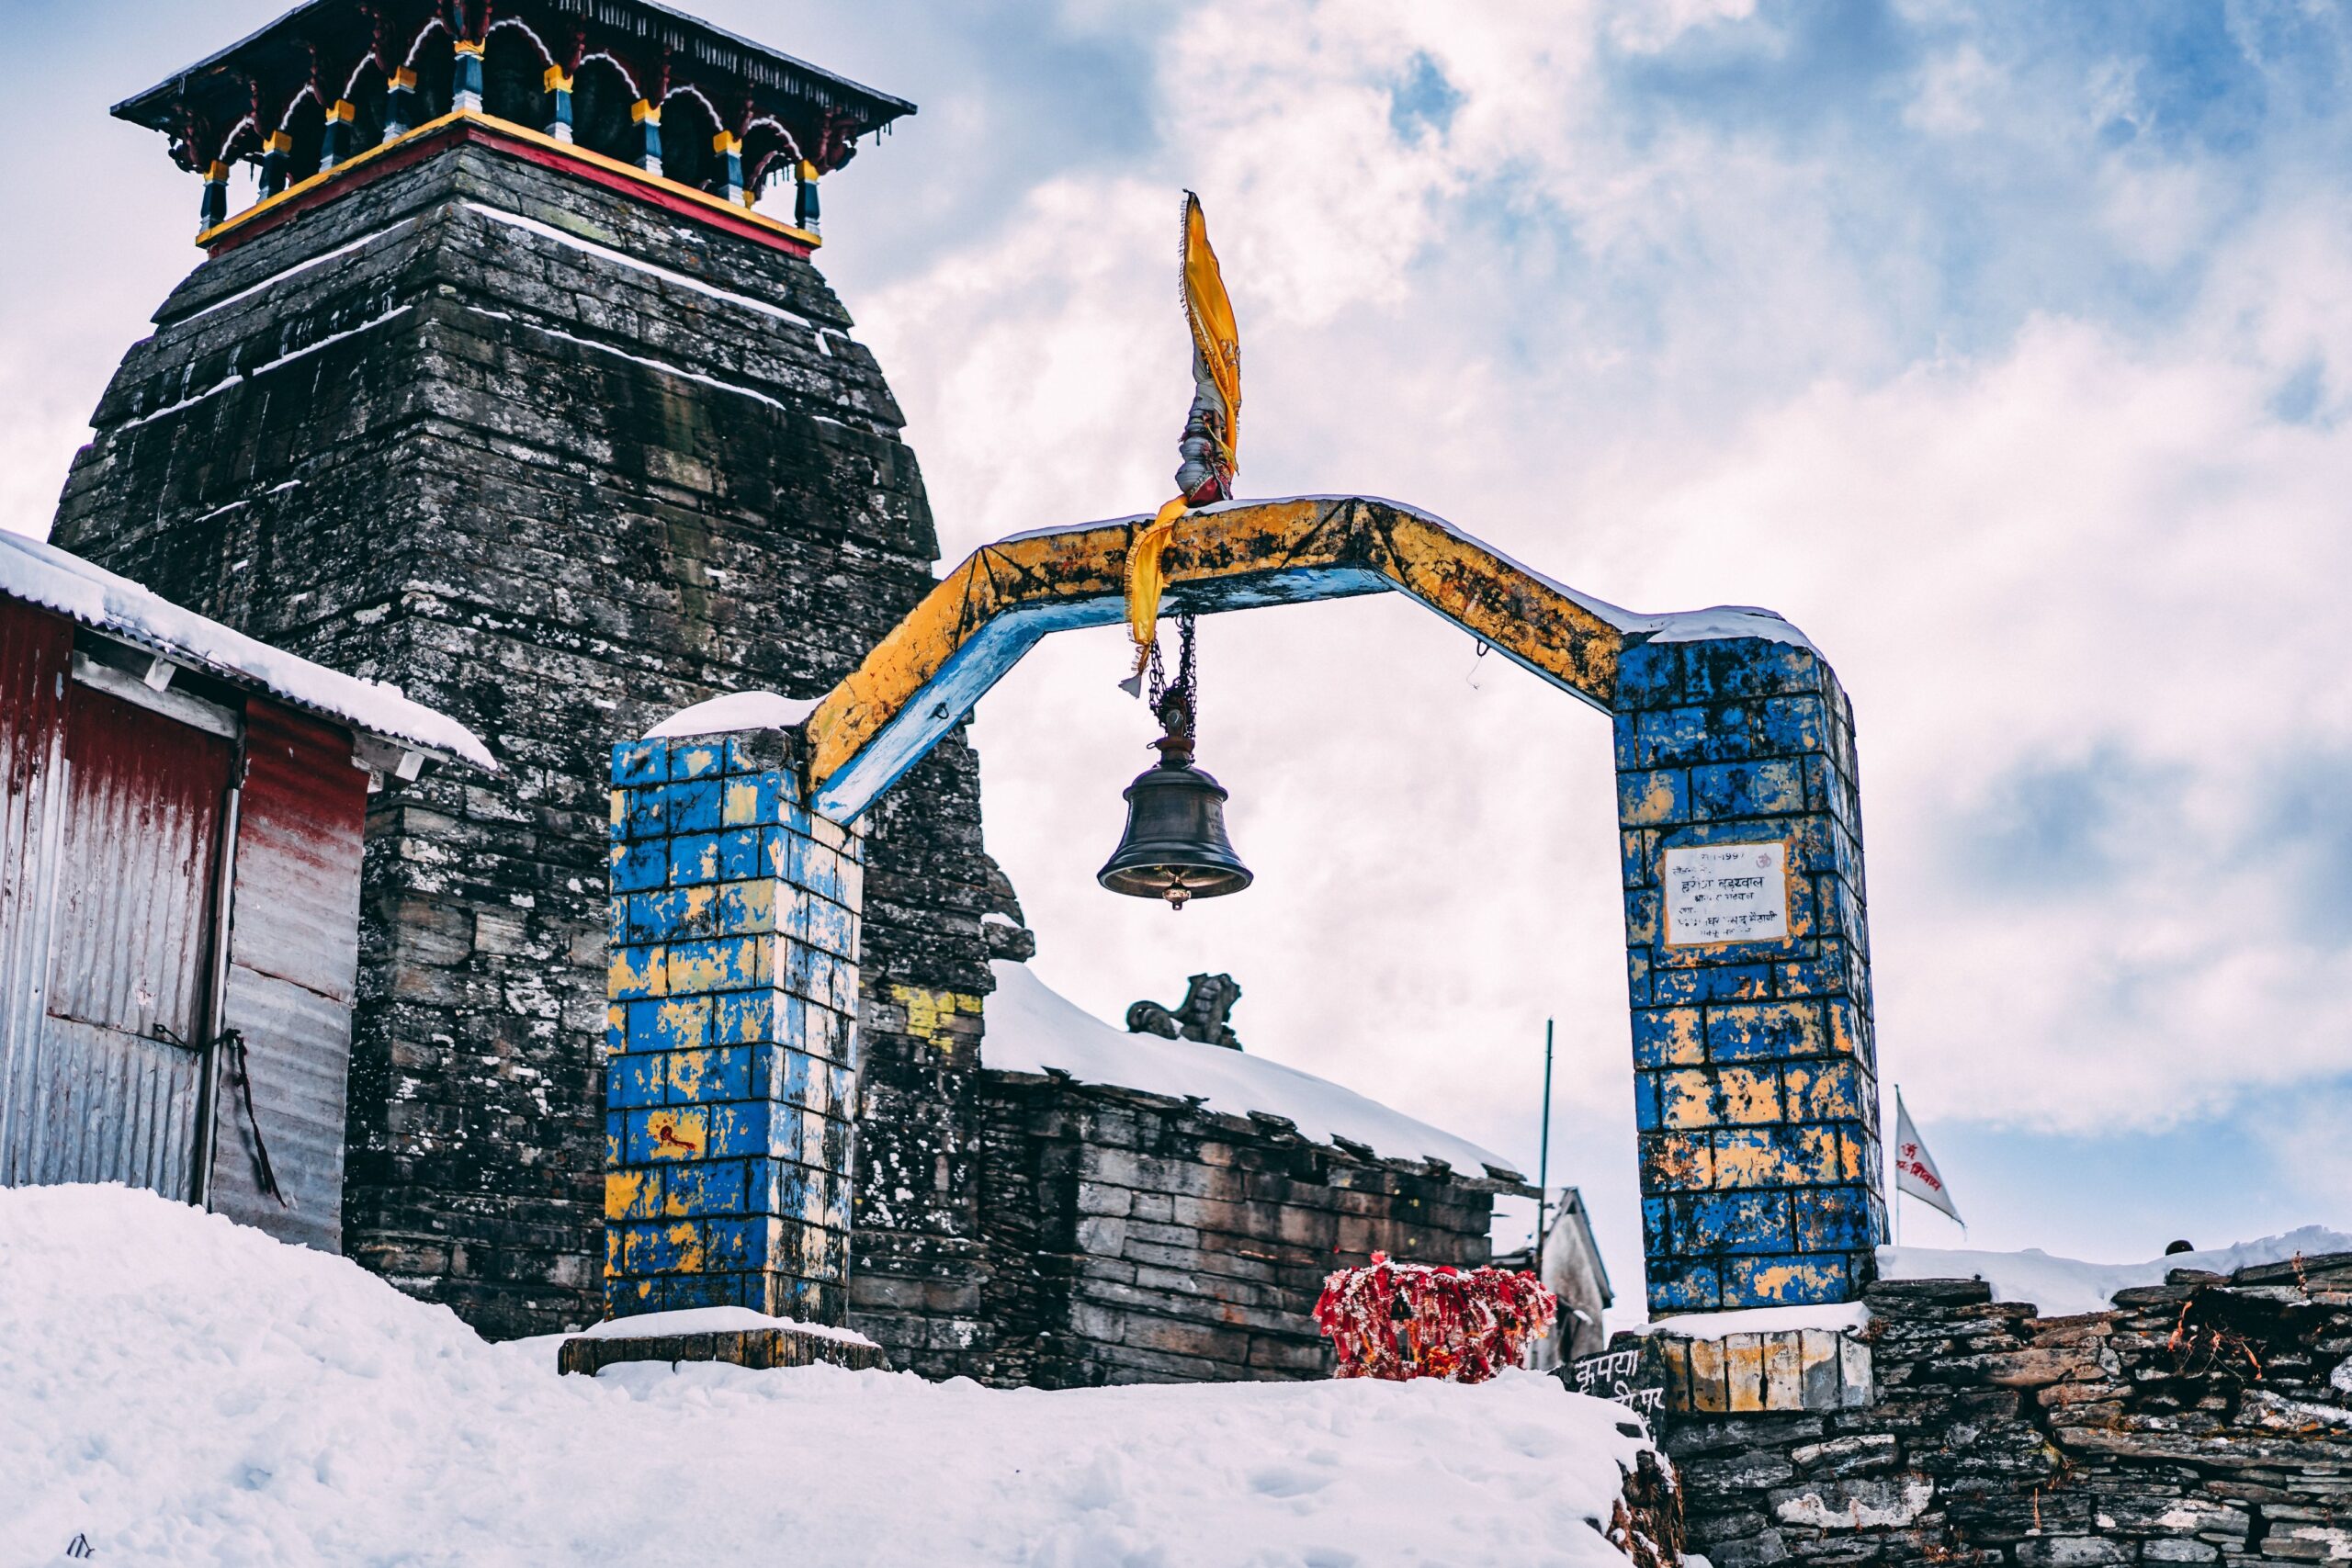 tungnath-temple-the-highest-shiva-shrine-in-the-world-tilts-at-an-angle-of-6-10-degrees_travellersofindia.com (1)